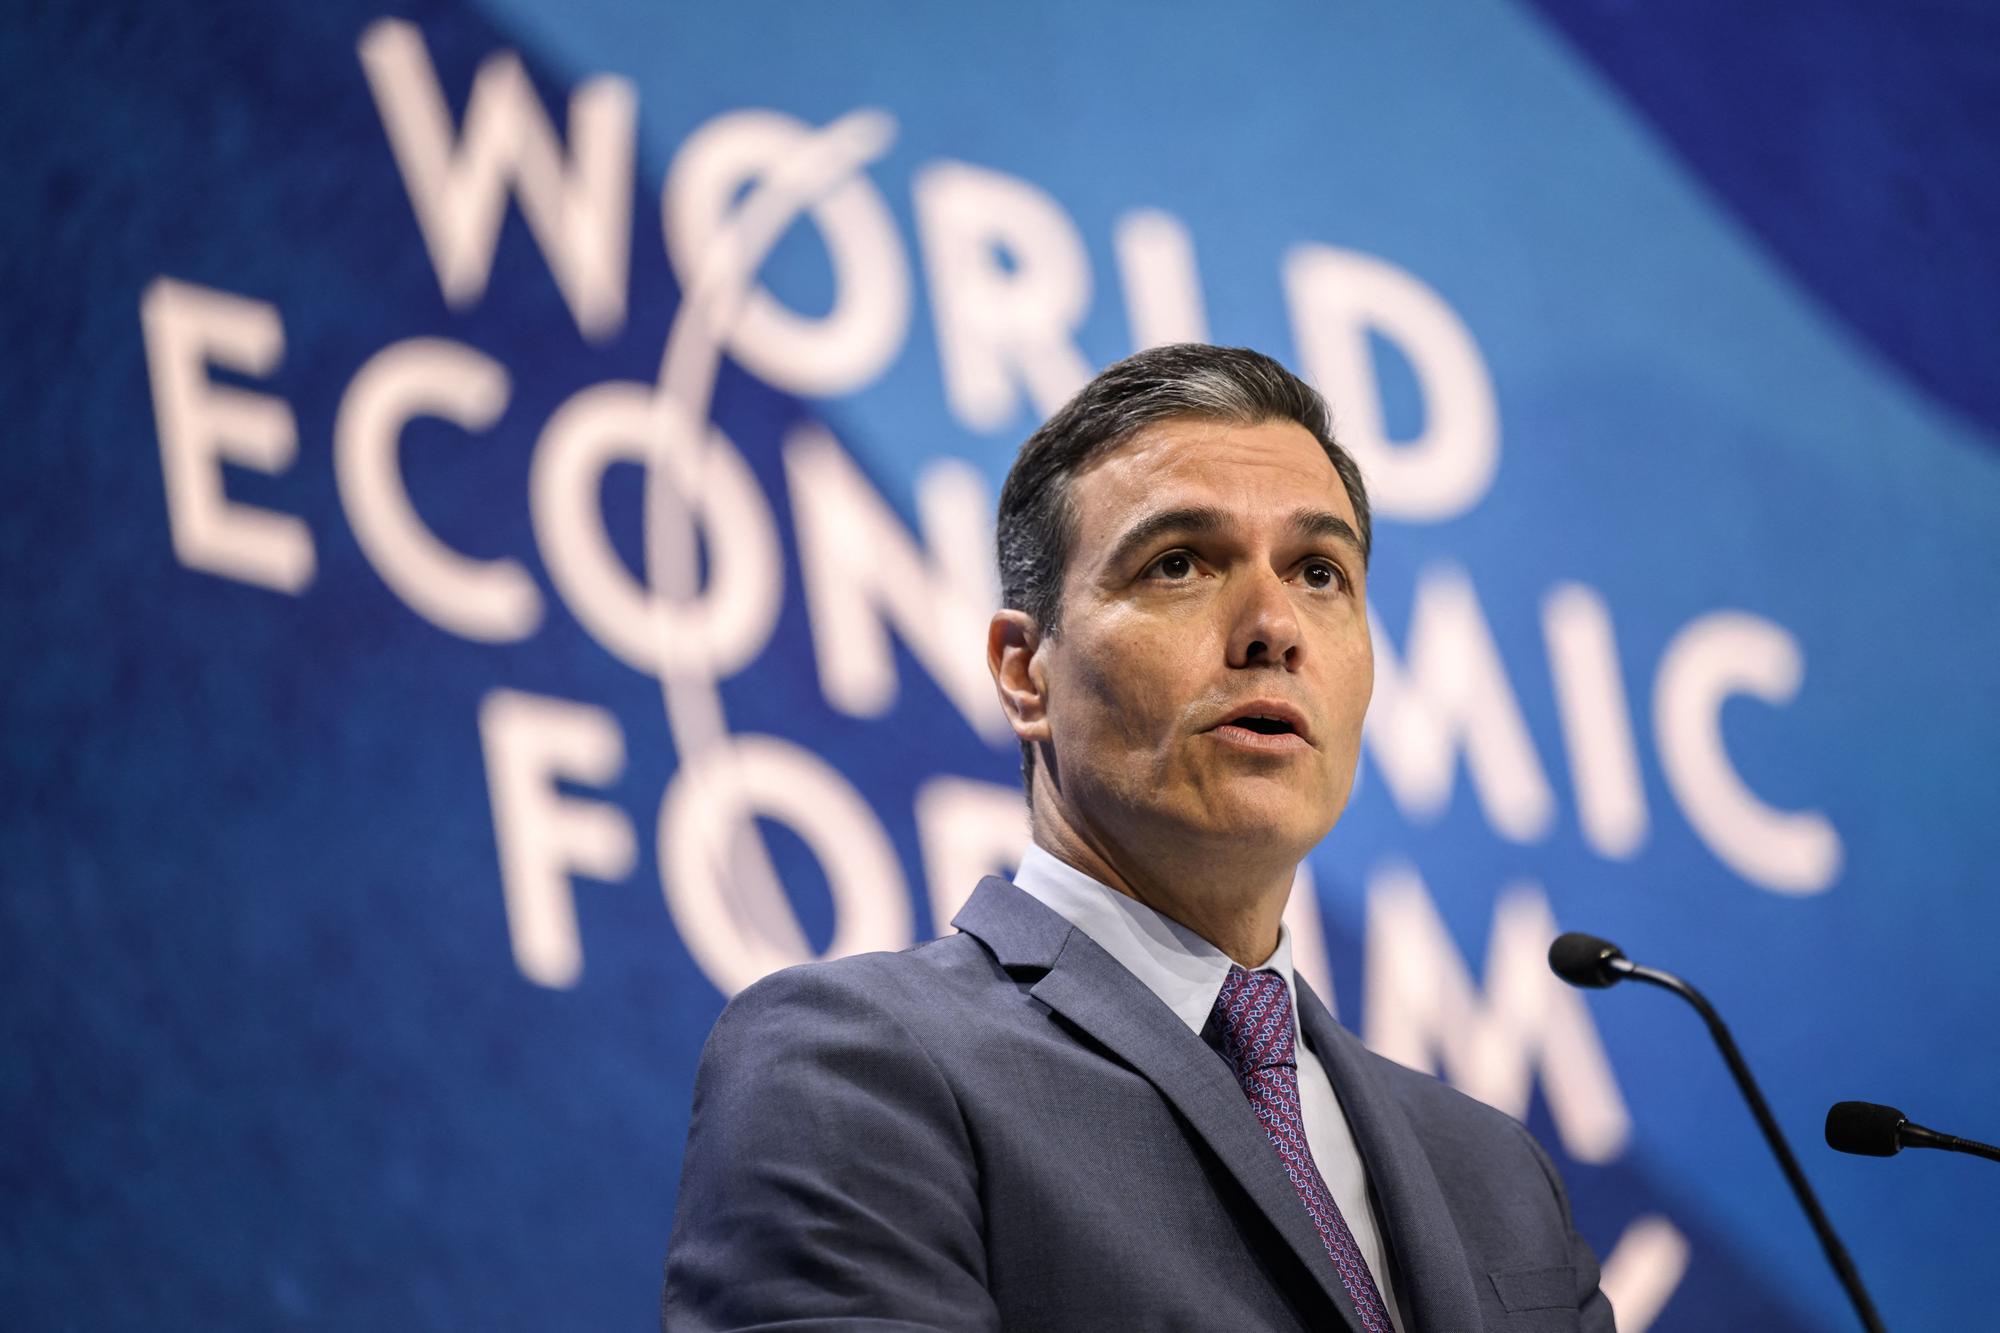 Spain's Prime Minister Pedro Sanchez delivers a speech during a session at the World Economic Forum (WEF) annual meeting in Davos on May 24, 2022. (Photo by Fabrice COFFRINI / AFP)